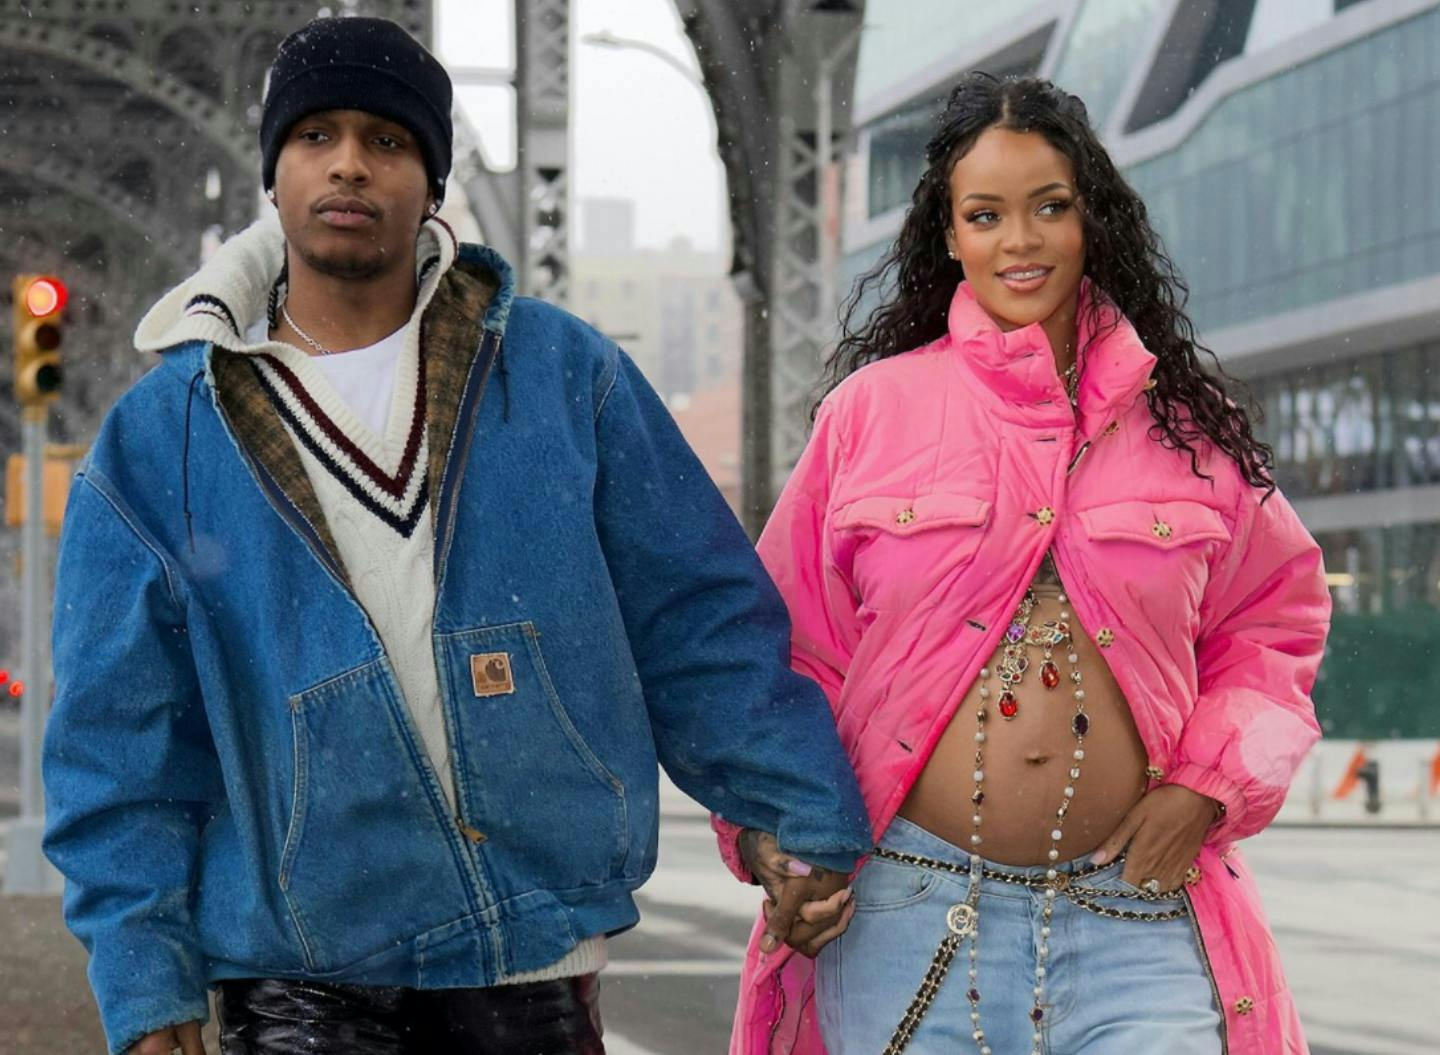 Preganant Rihanna and A$AP Rocky holding hands.